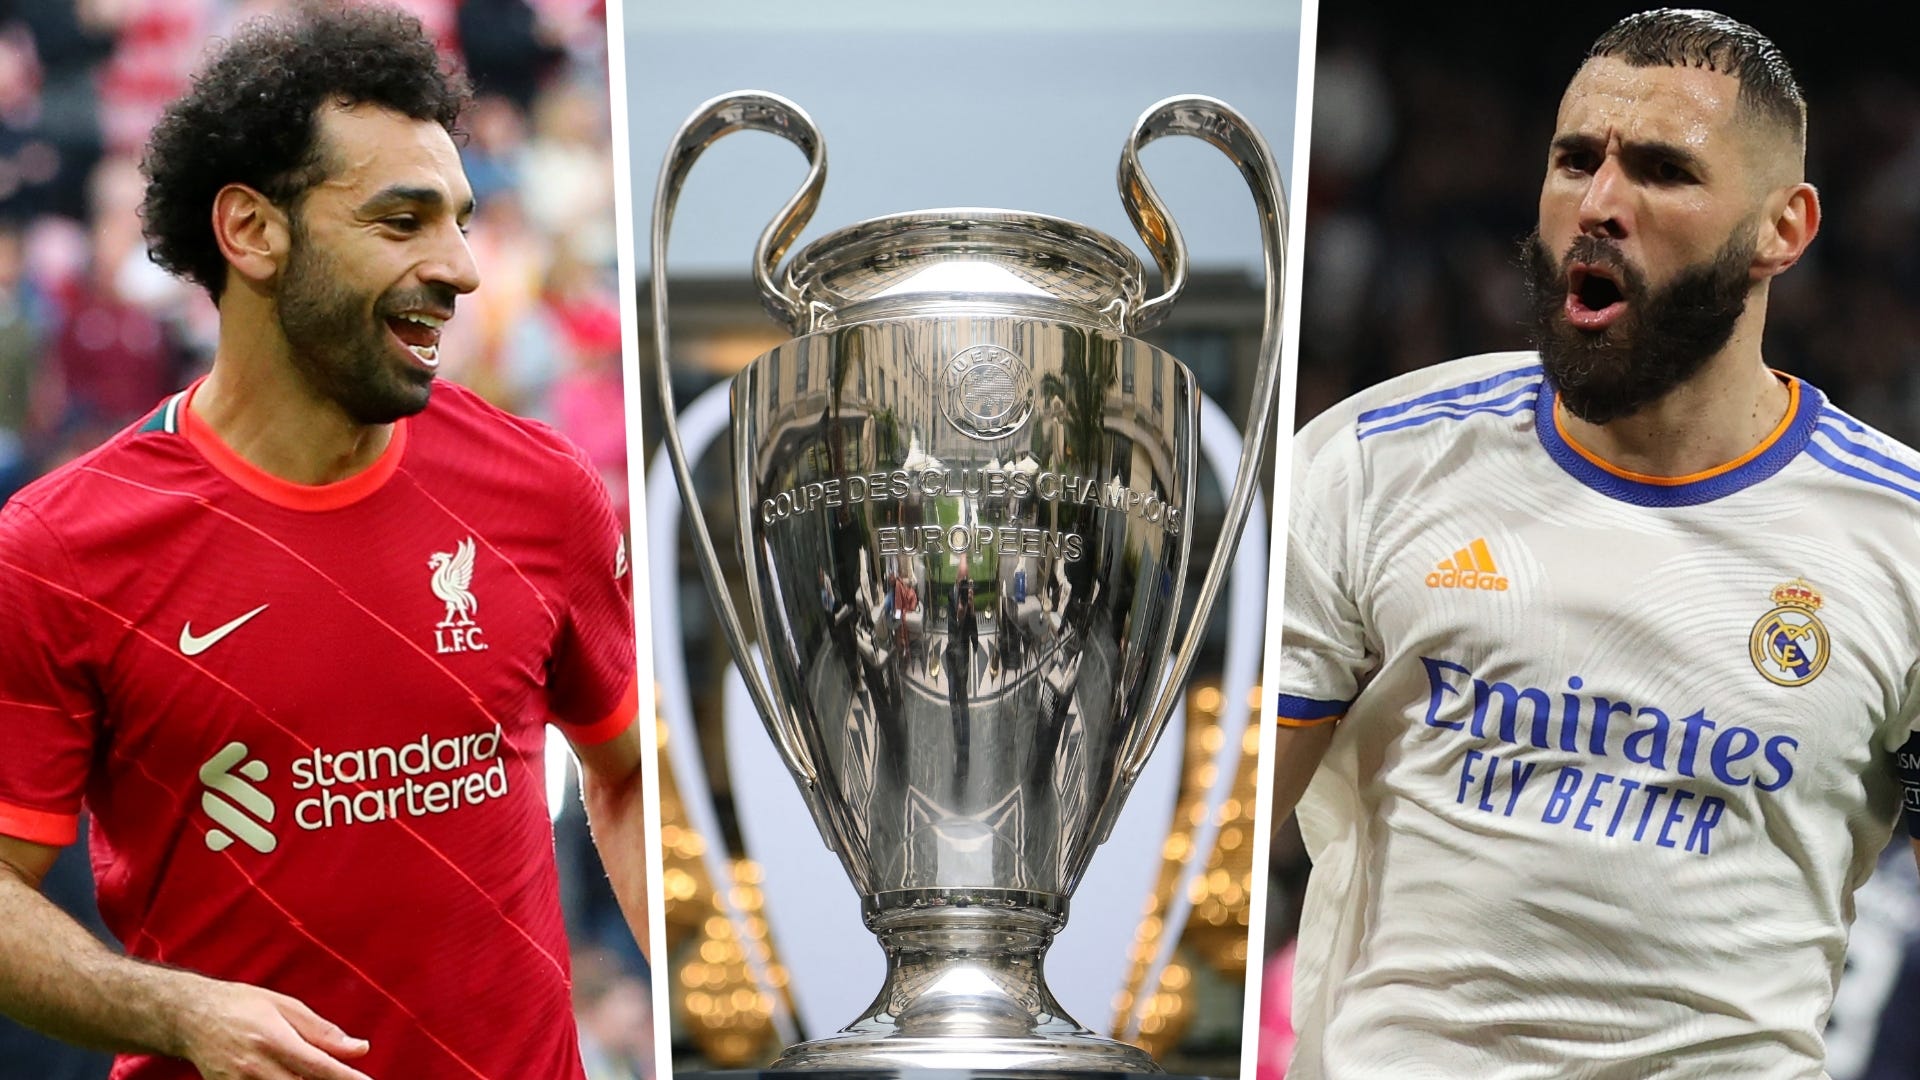 UCL final live blog liverpool-real madrid